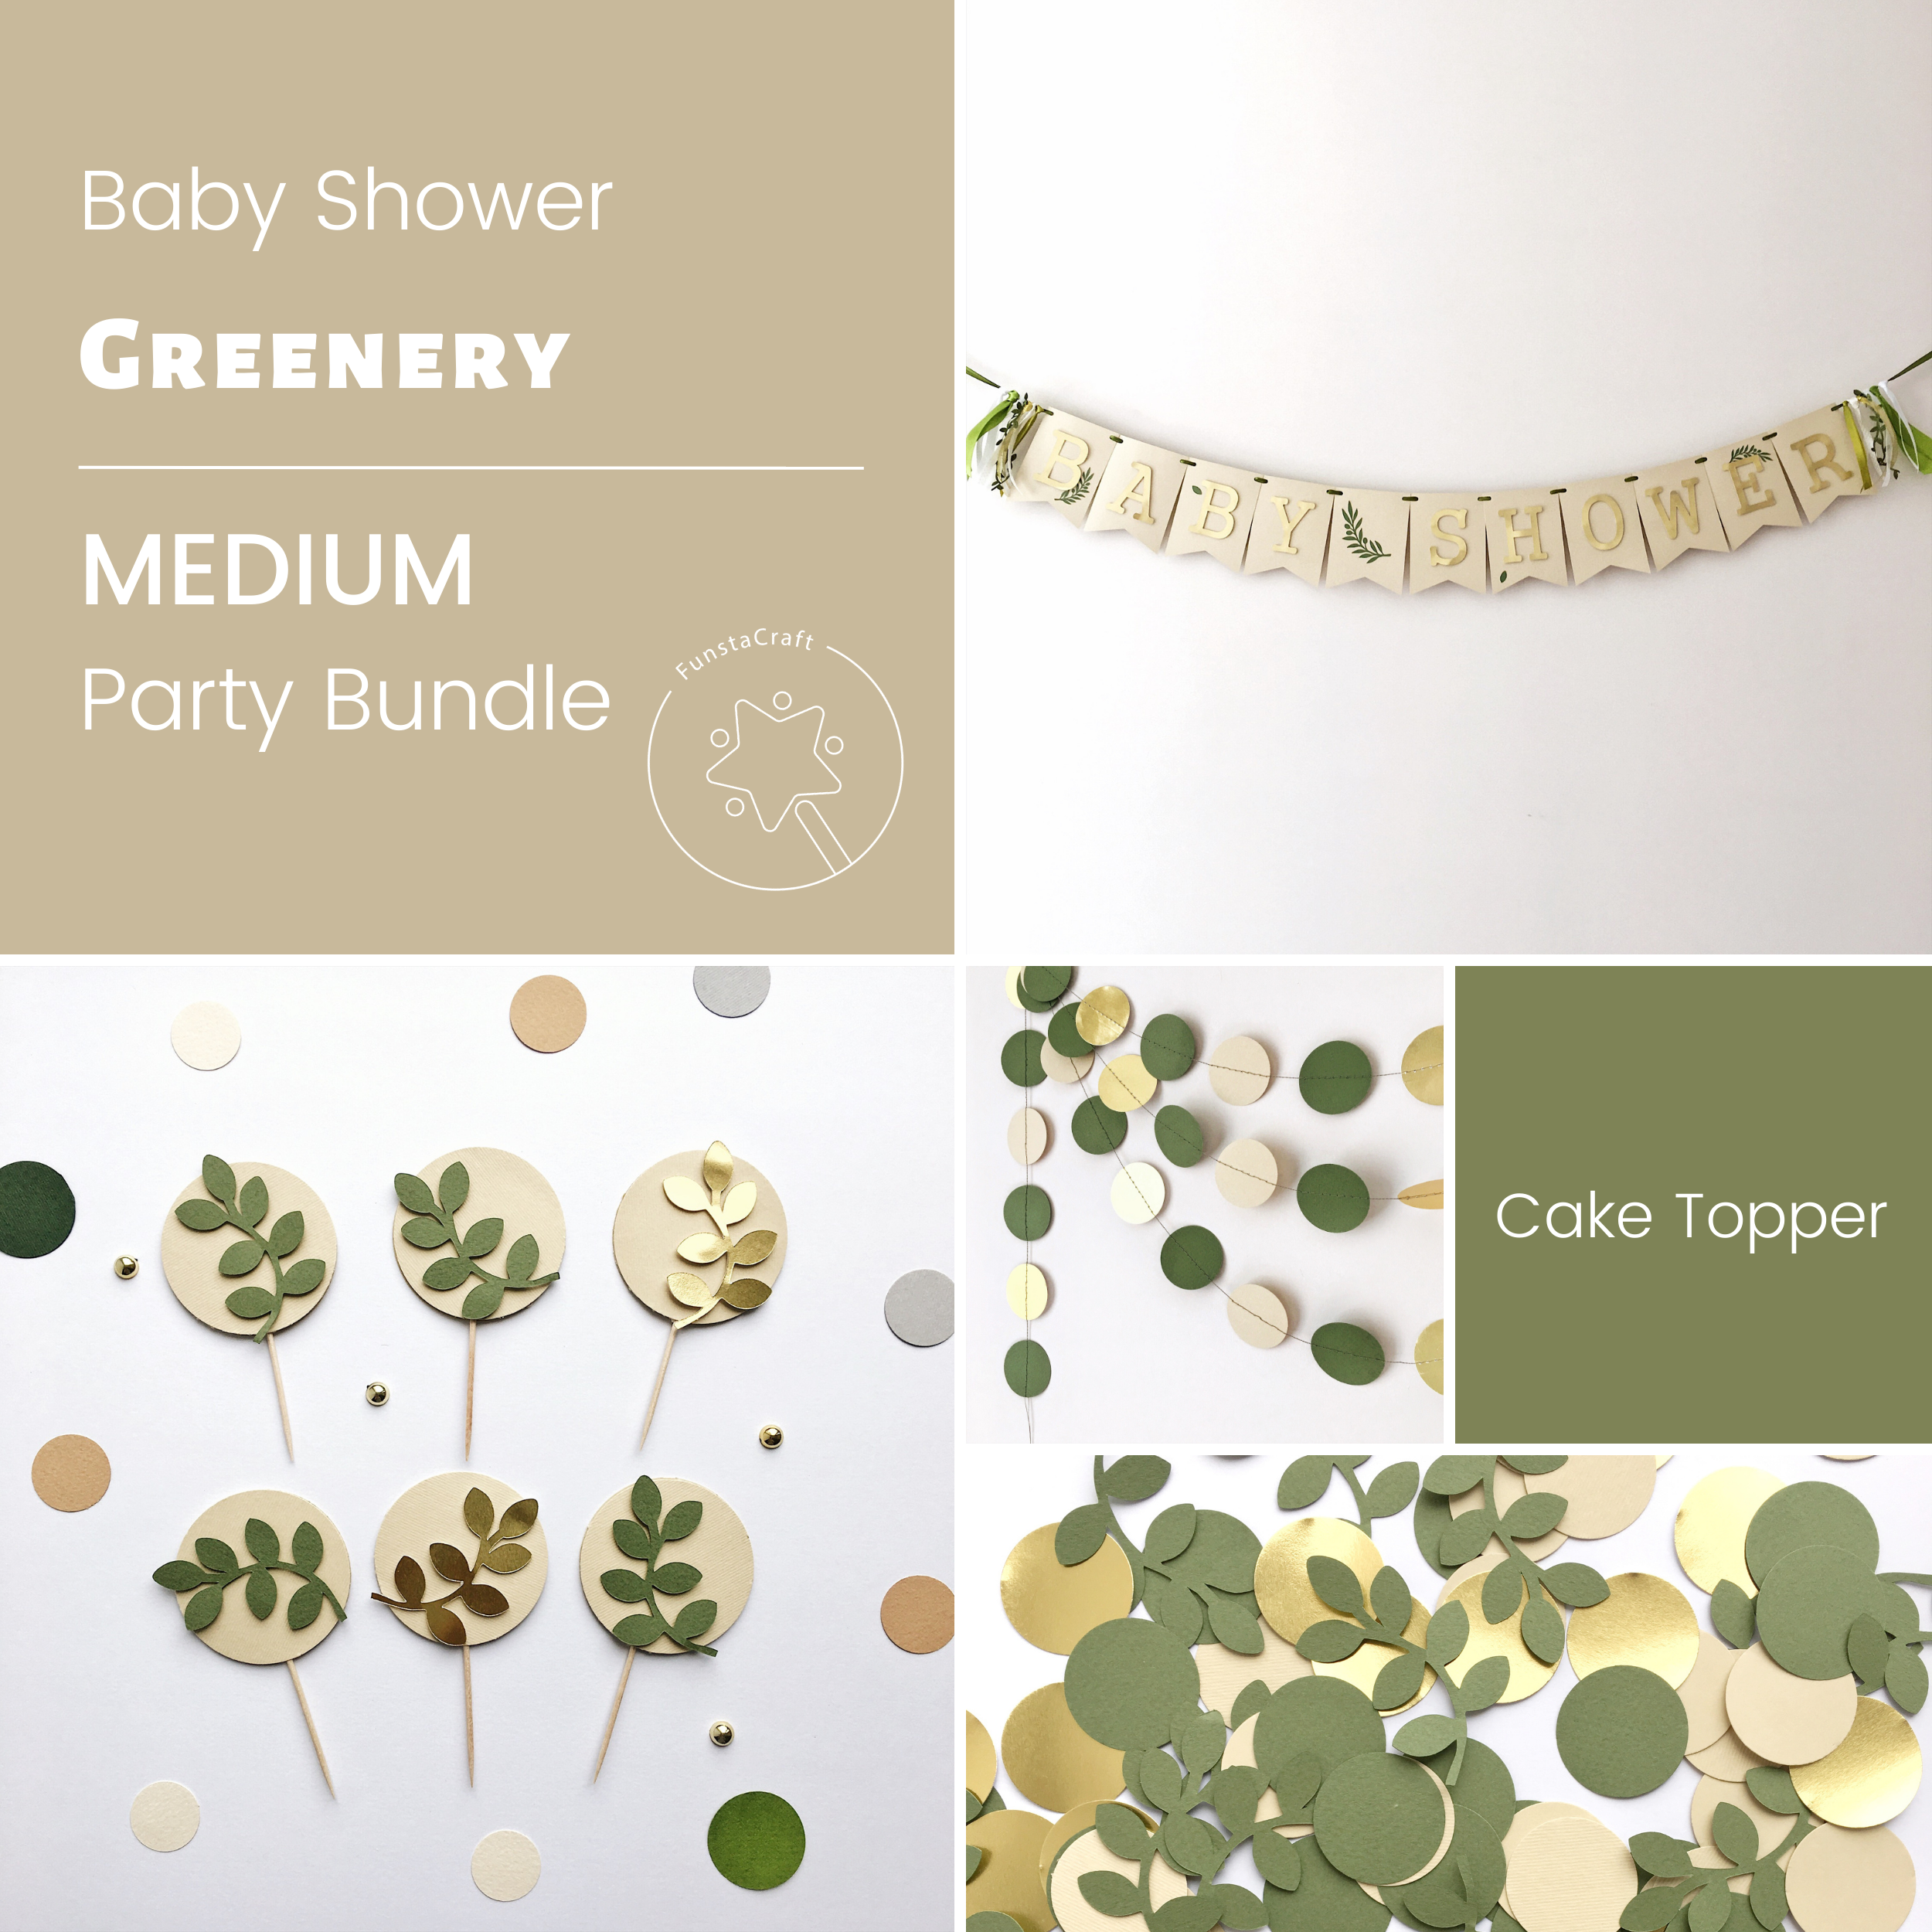 Baby Shower Greenery Party Bundle